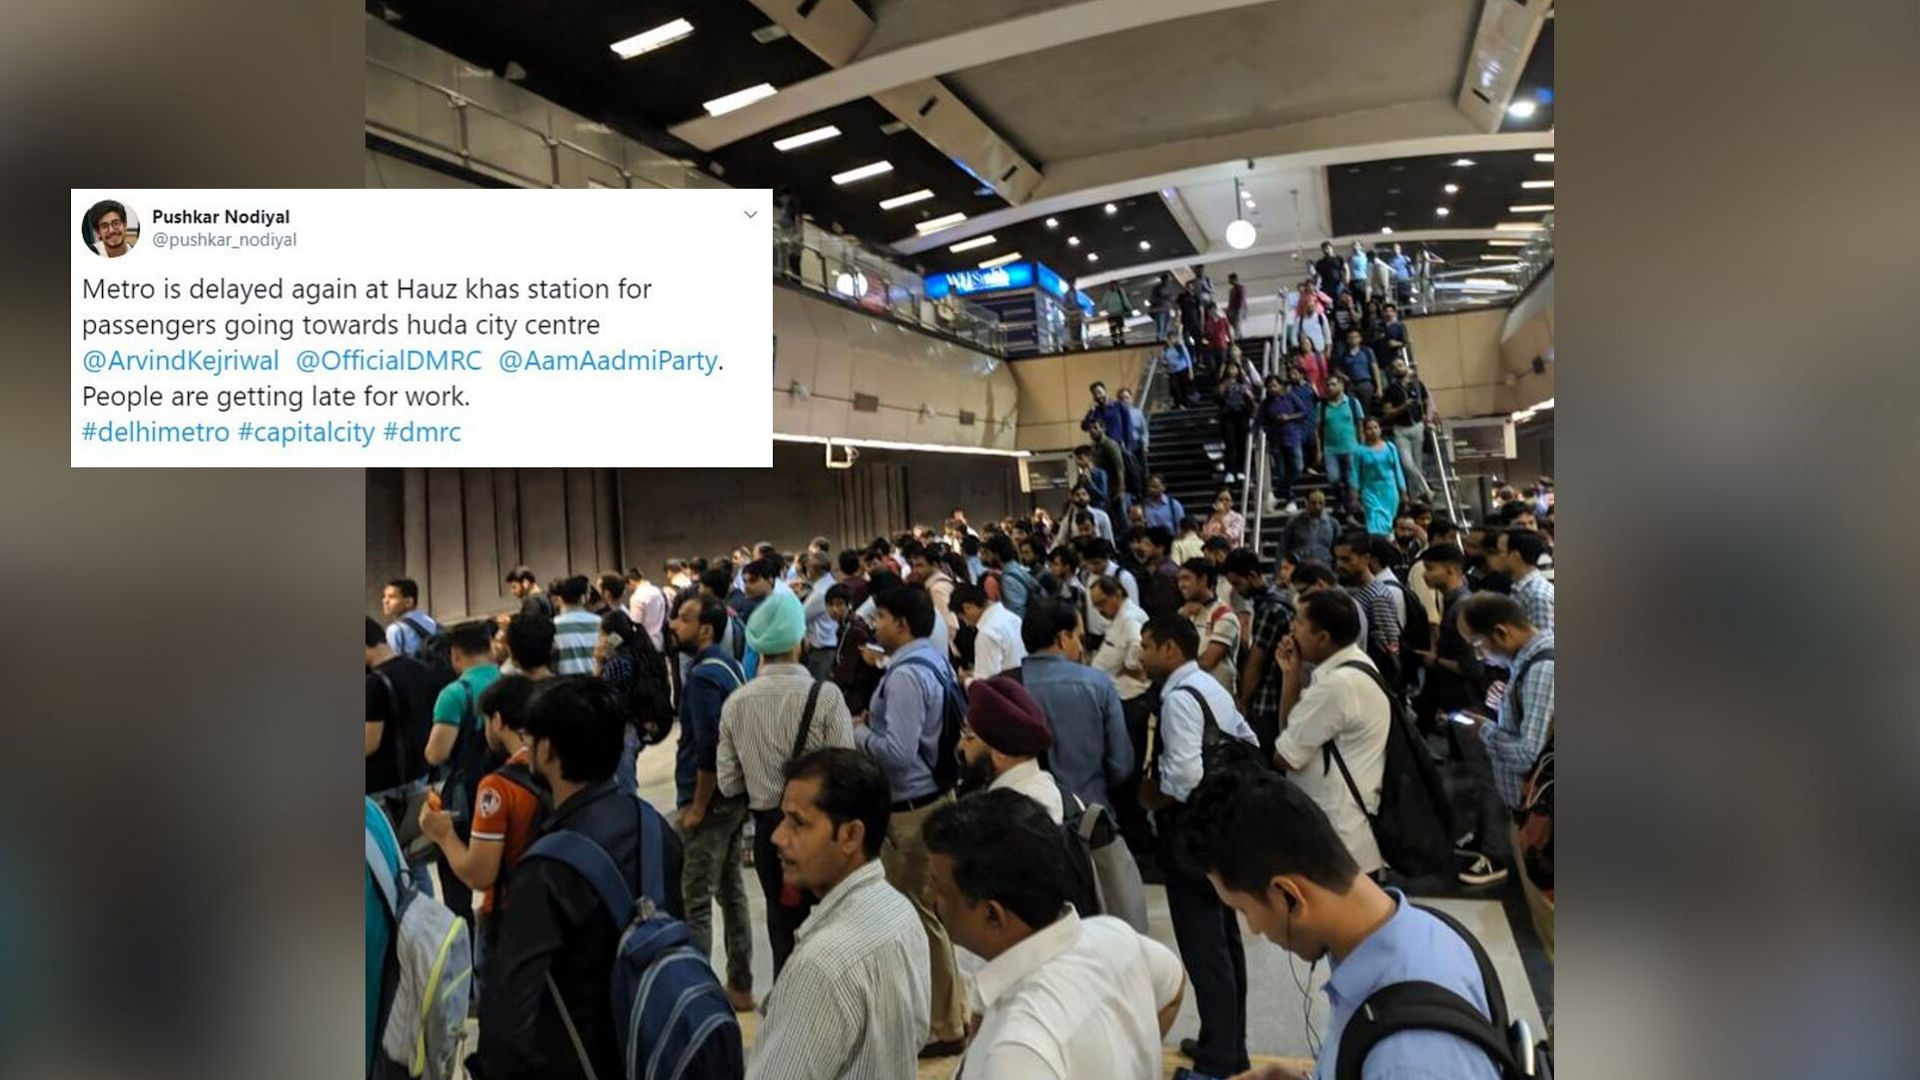 Upset with the Delhi Metro service, commuters took to Twitter and blamed the government for this “recurring” problem.